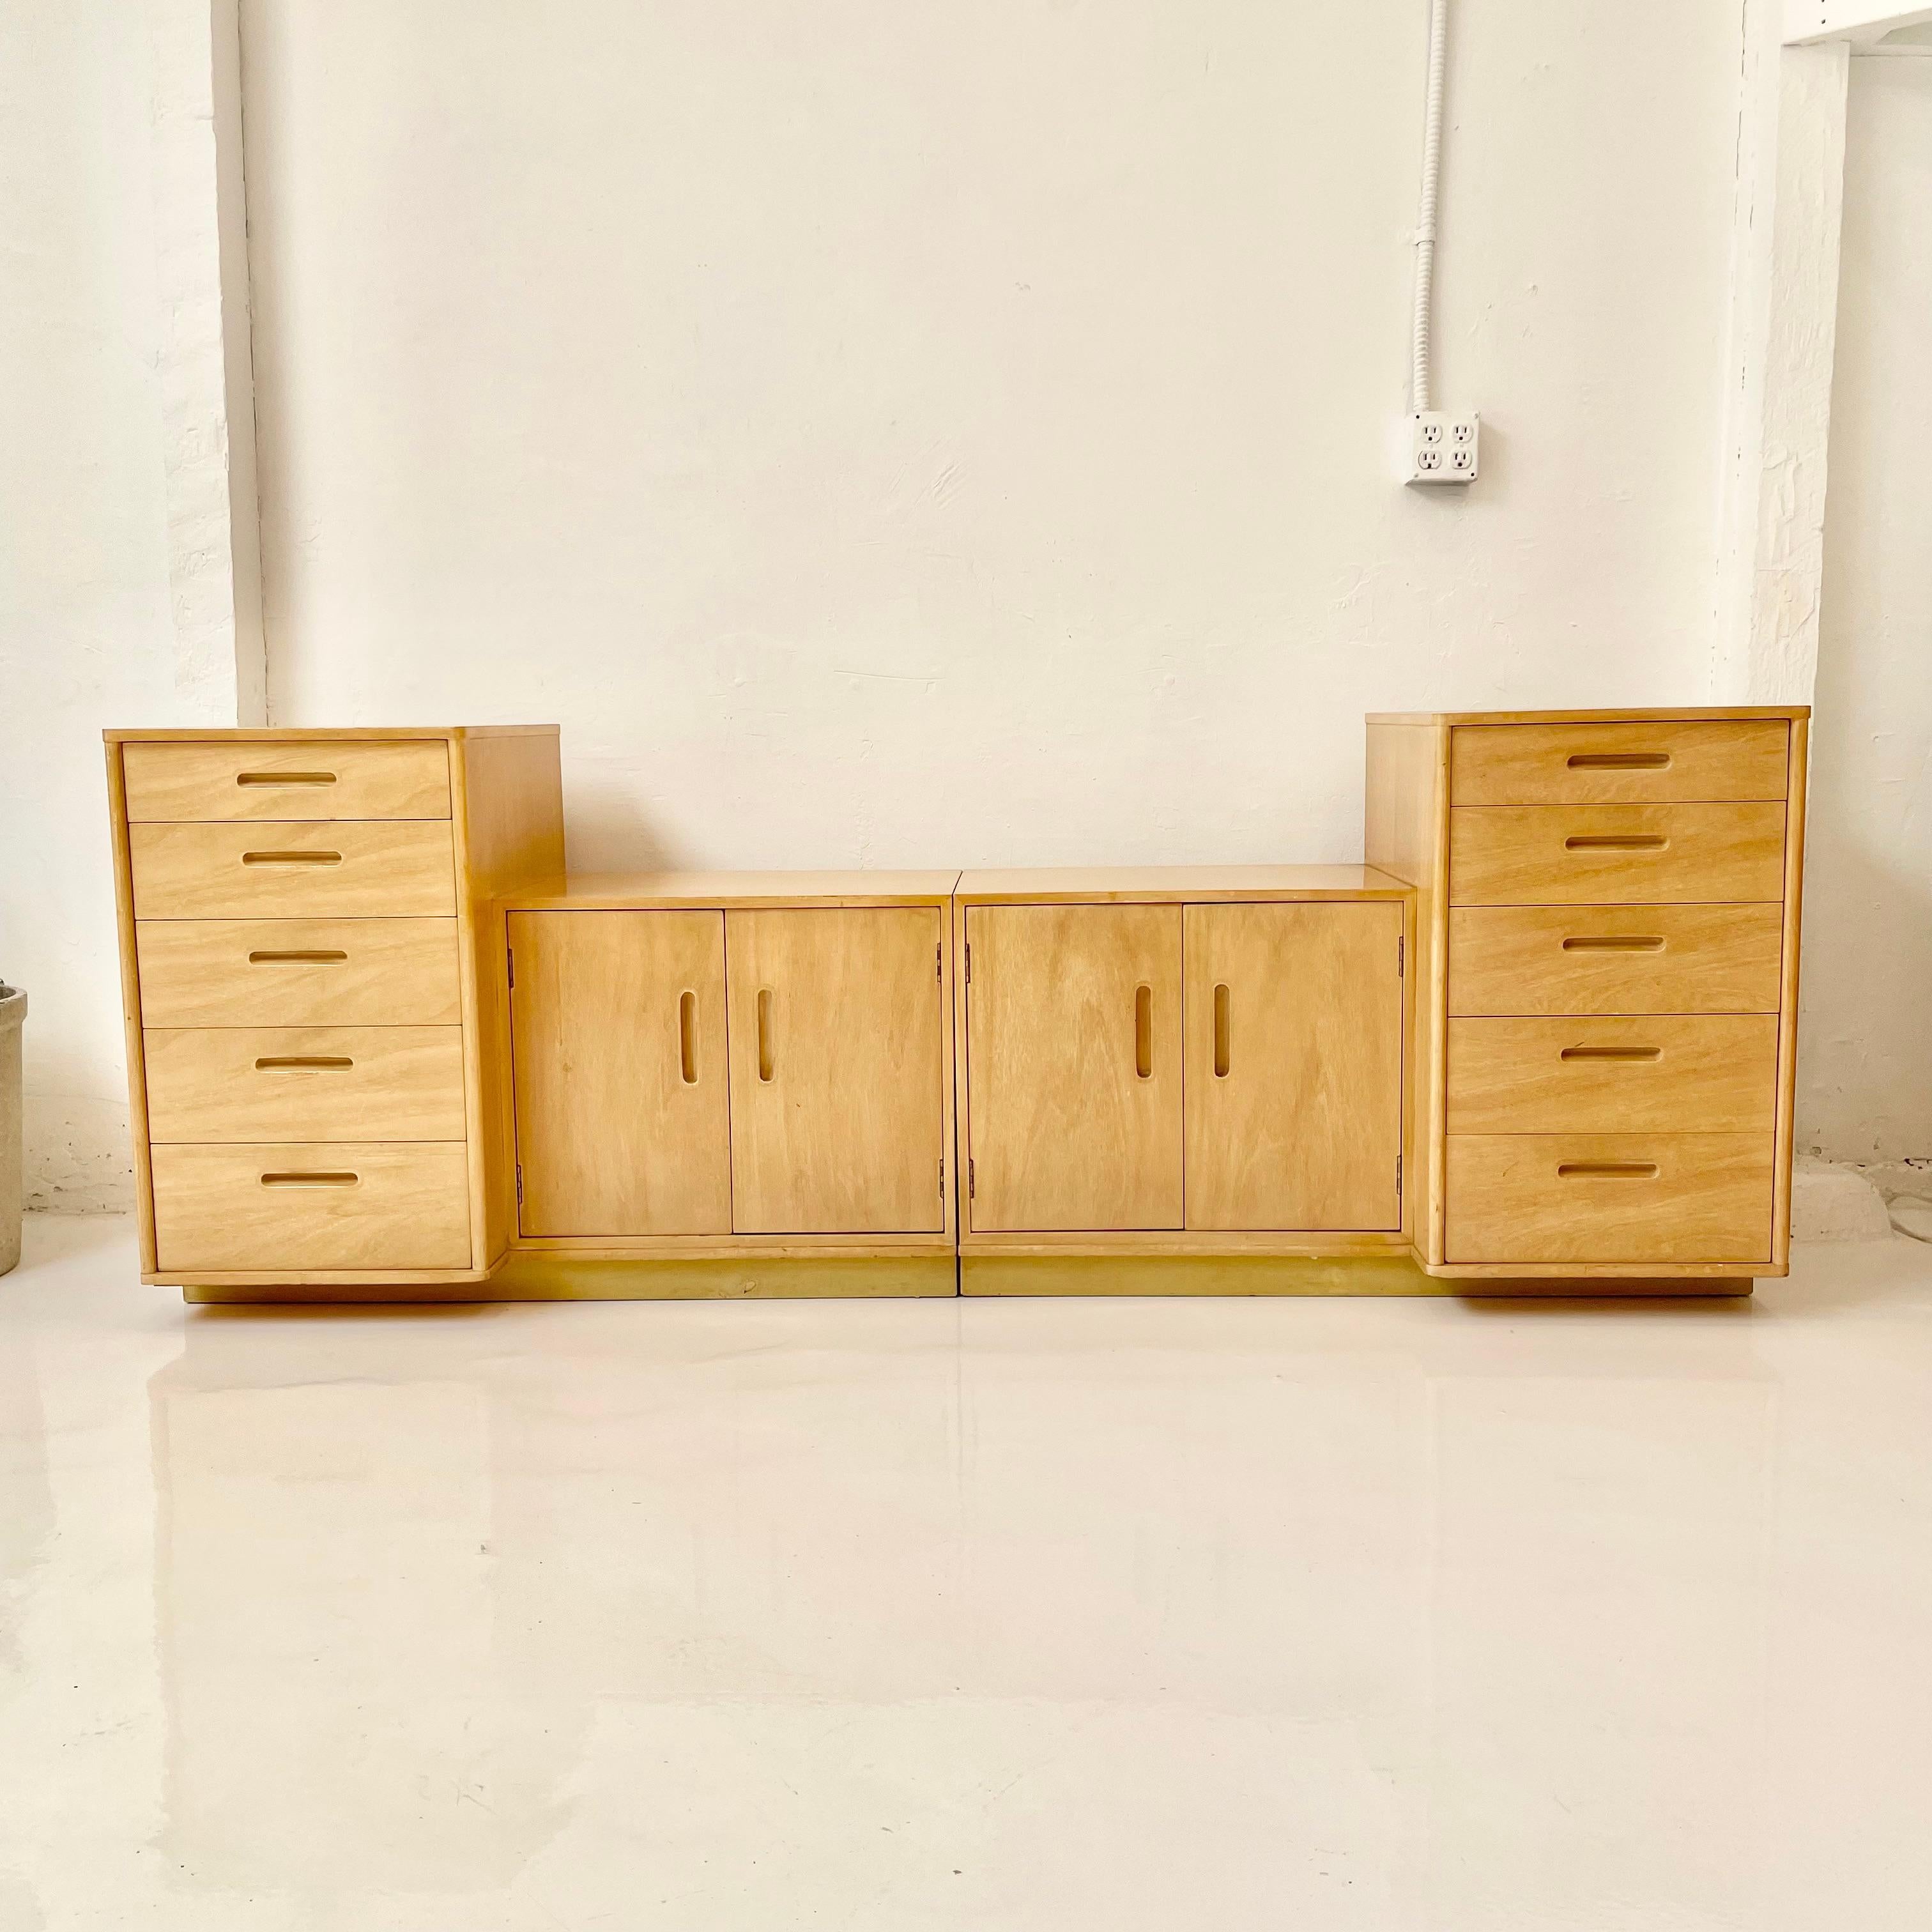 Early minimalist nightstands designed by Edward Wormley for Dunbar. Beautiful bleached mahogany cases with inset matching hardware and leather wrapped bases. Very functional set and perfect scale. Great as nightstands, cabinets or placed together